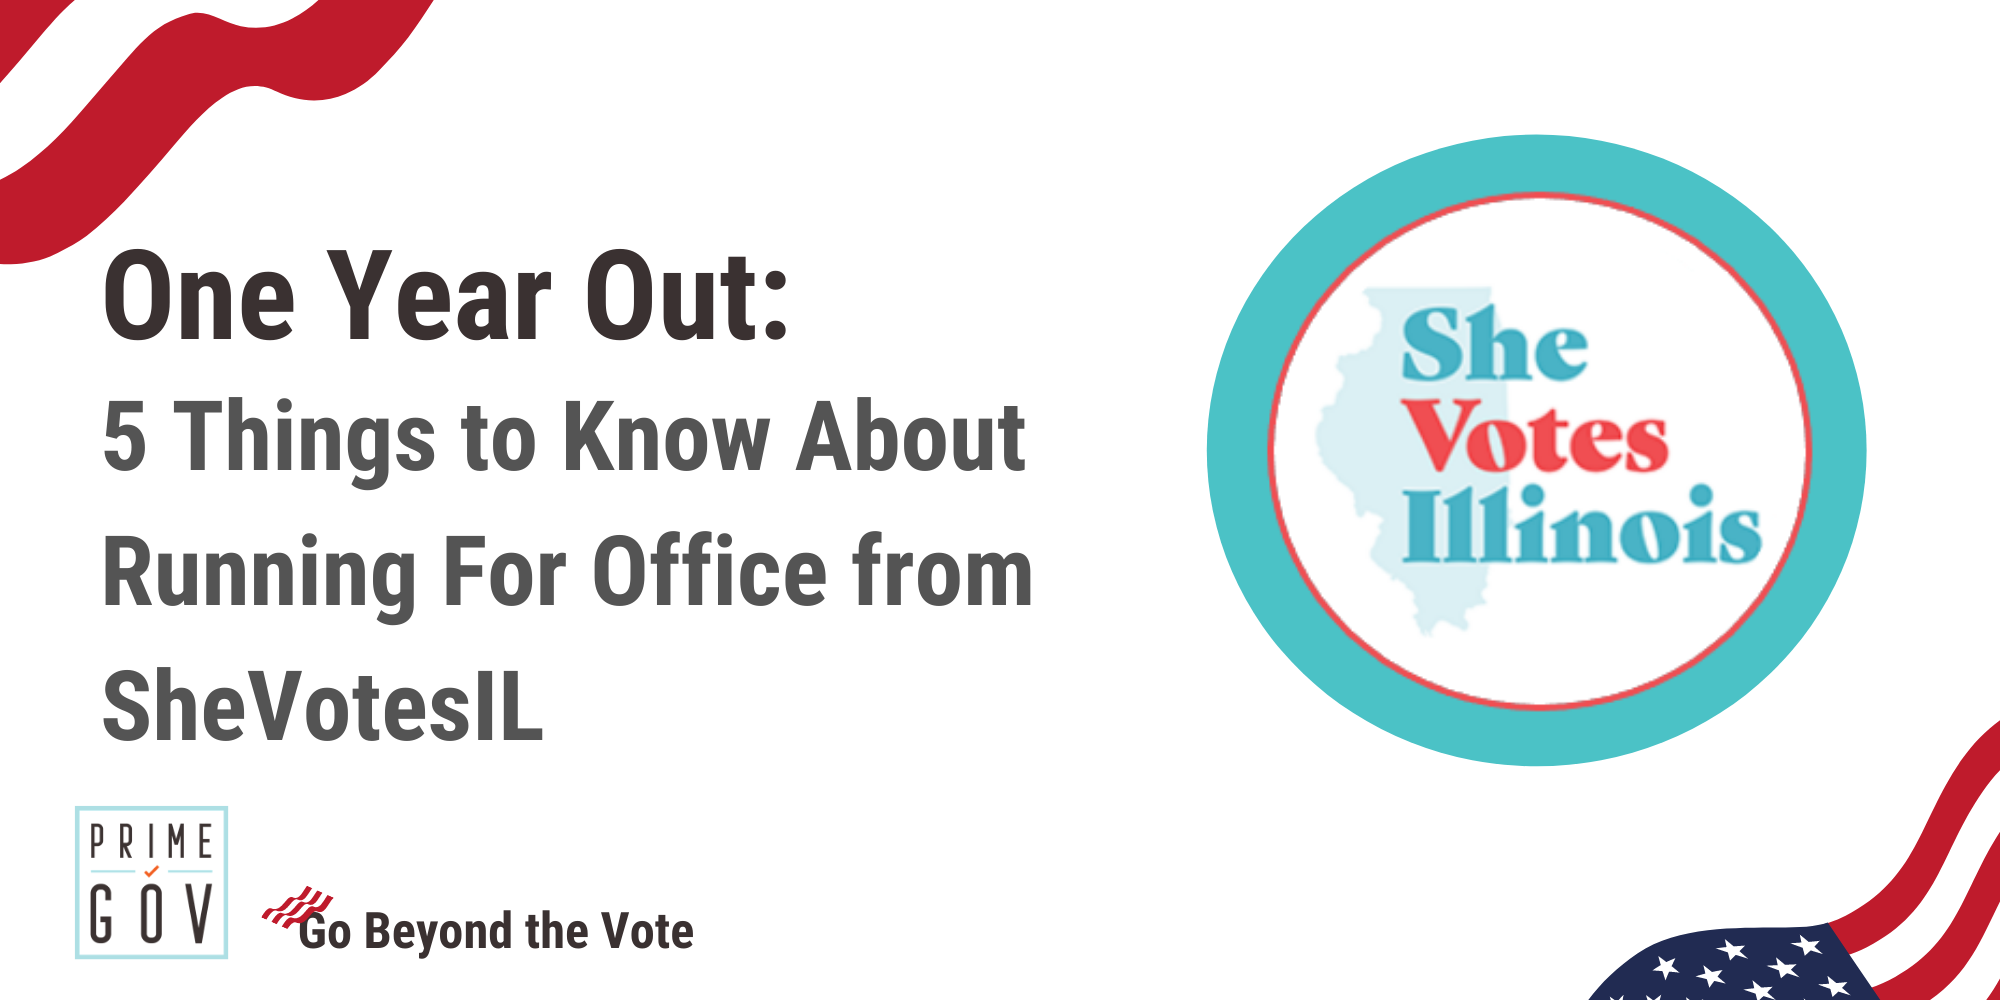 One Year Out: 5 Things to Know About Running for Office